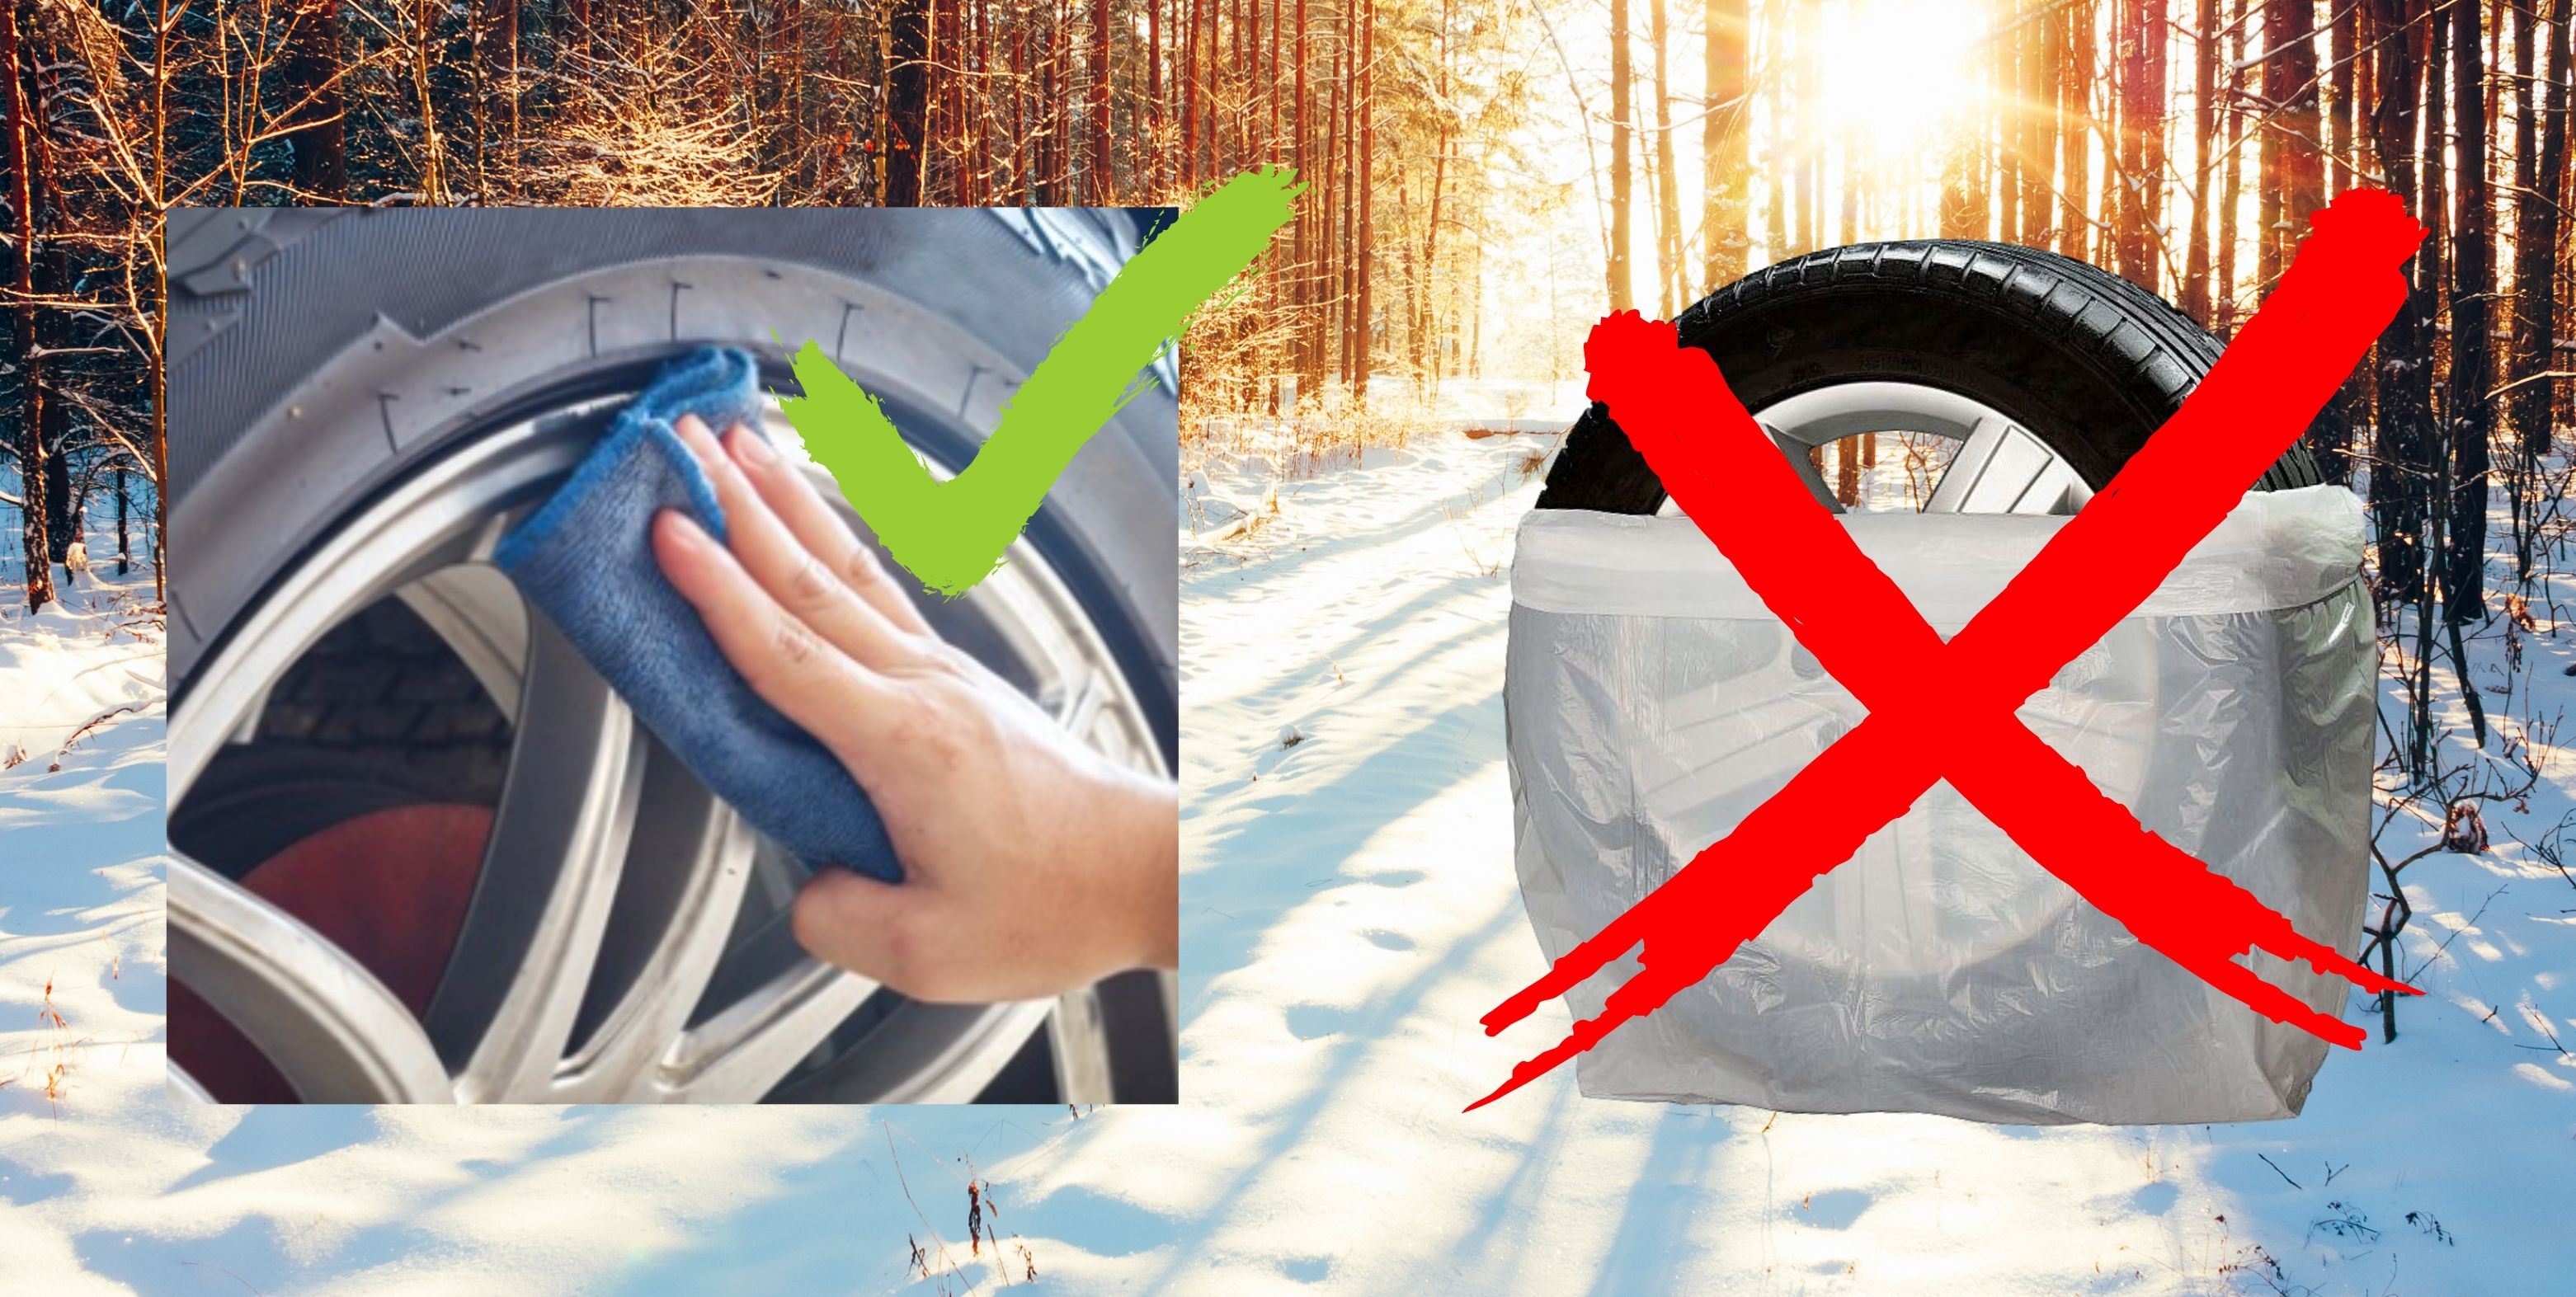 Winter is here! Here's how to store your summer wheels and tires